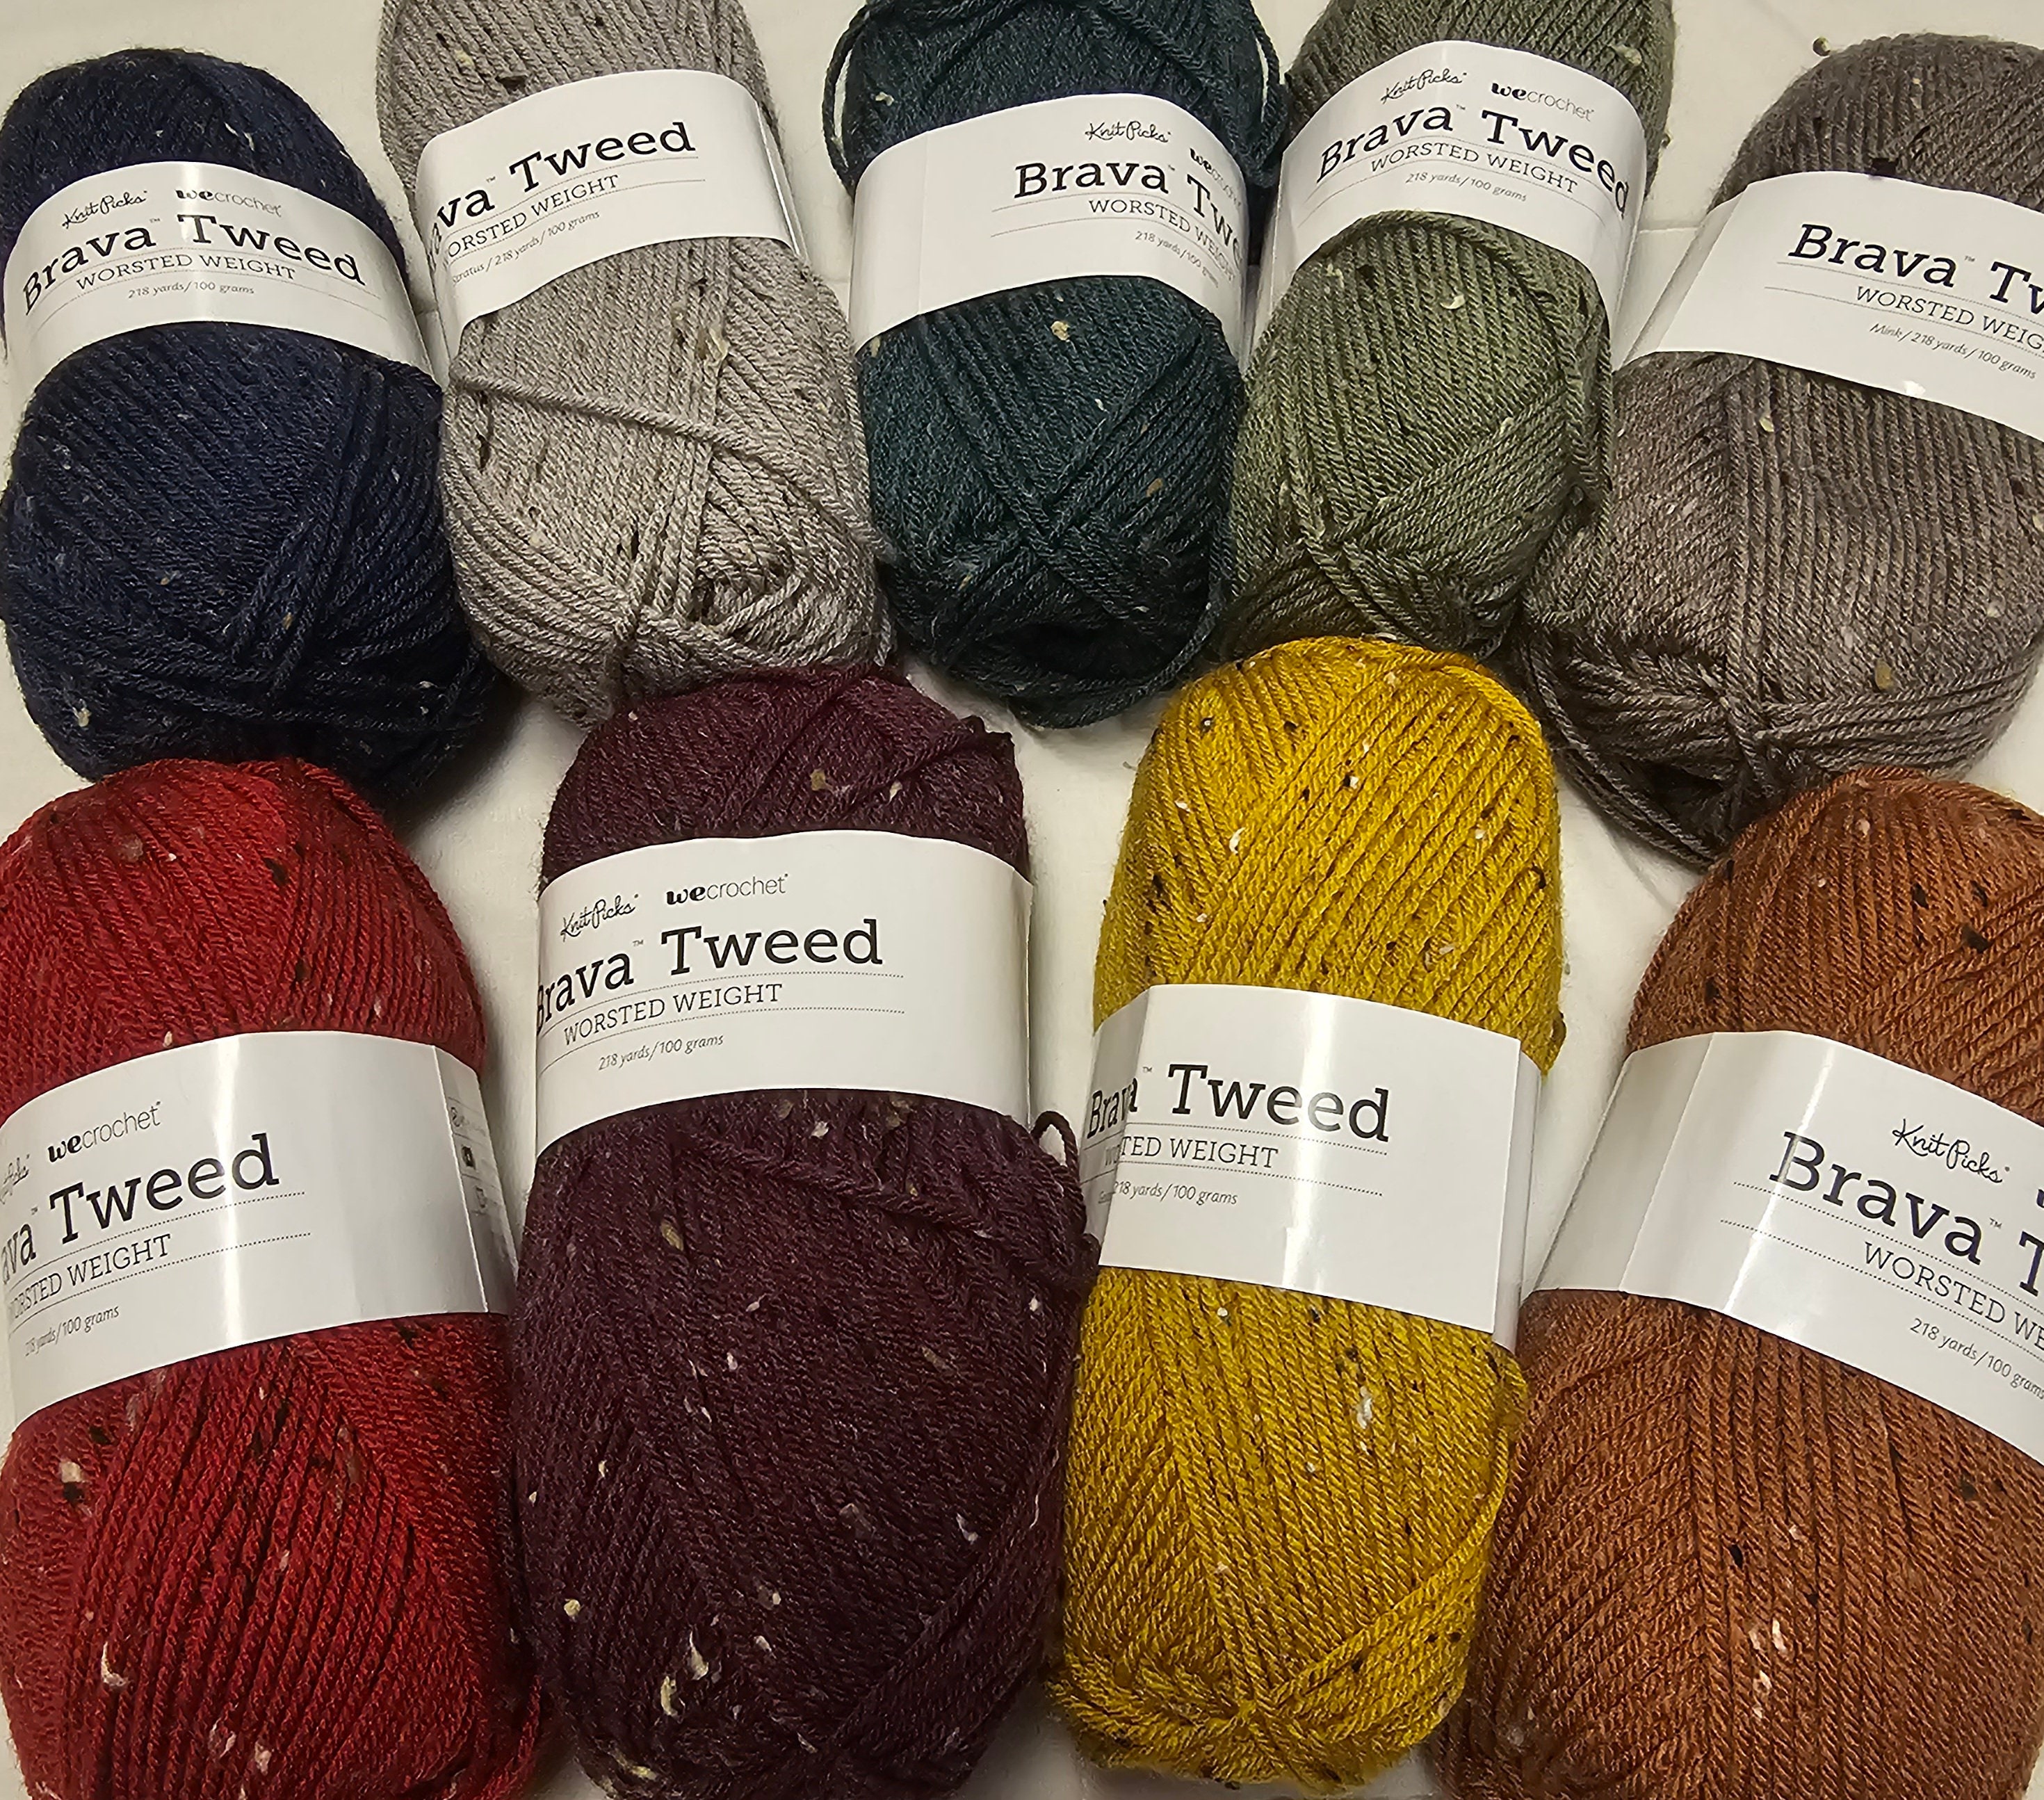 Knit Picks Brava Sport Yarn Review - Quality, Colours, and More